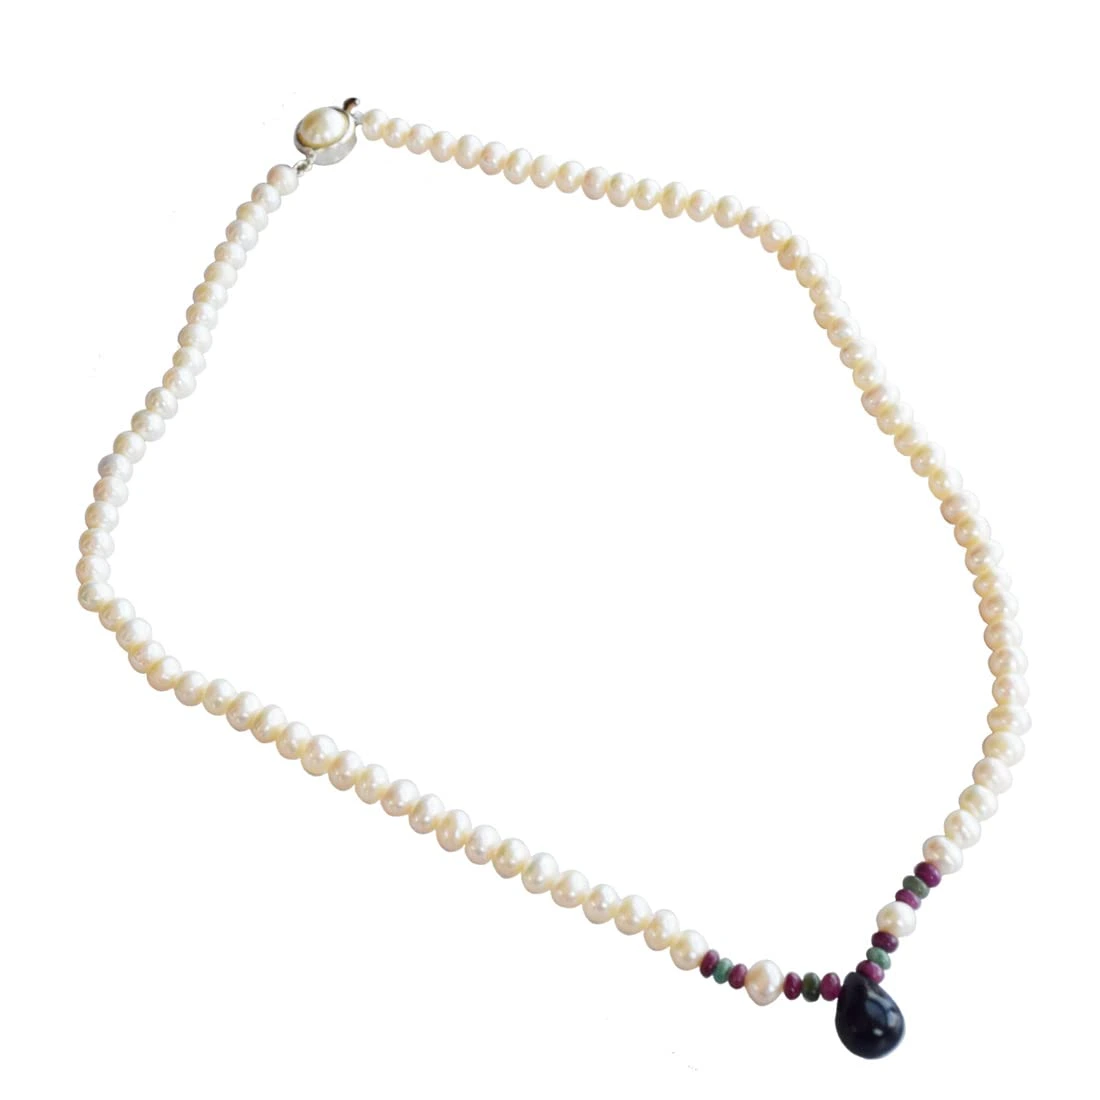 Sapphire, Emerald, Ruby Beads & Rice Pearl Necklace (SN440)